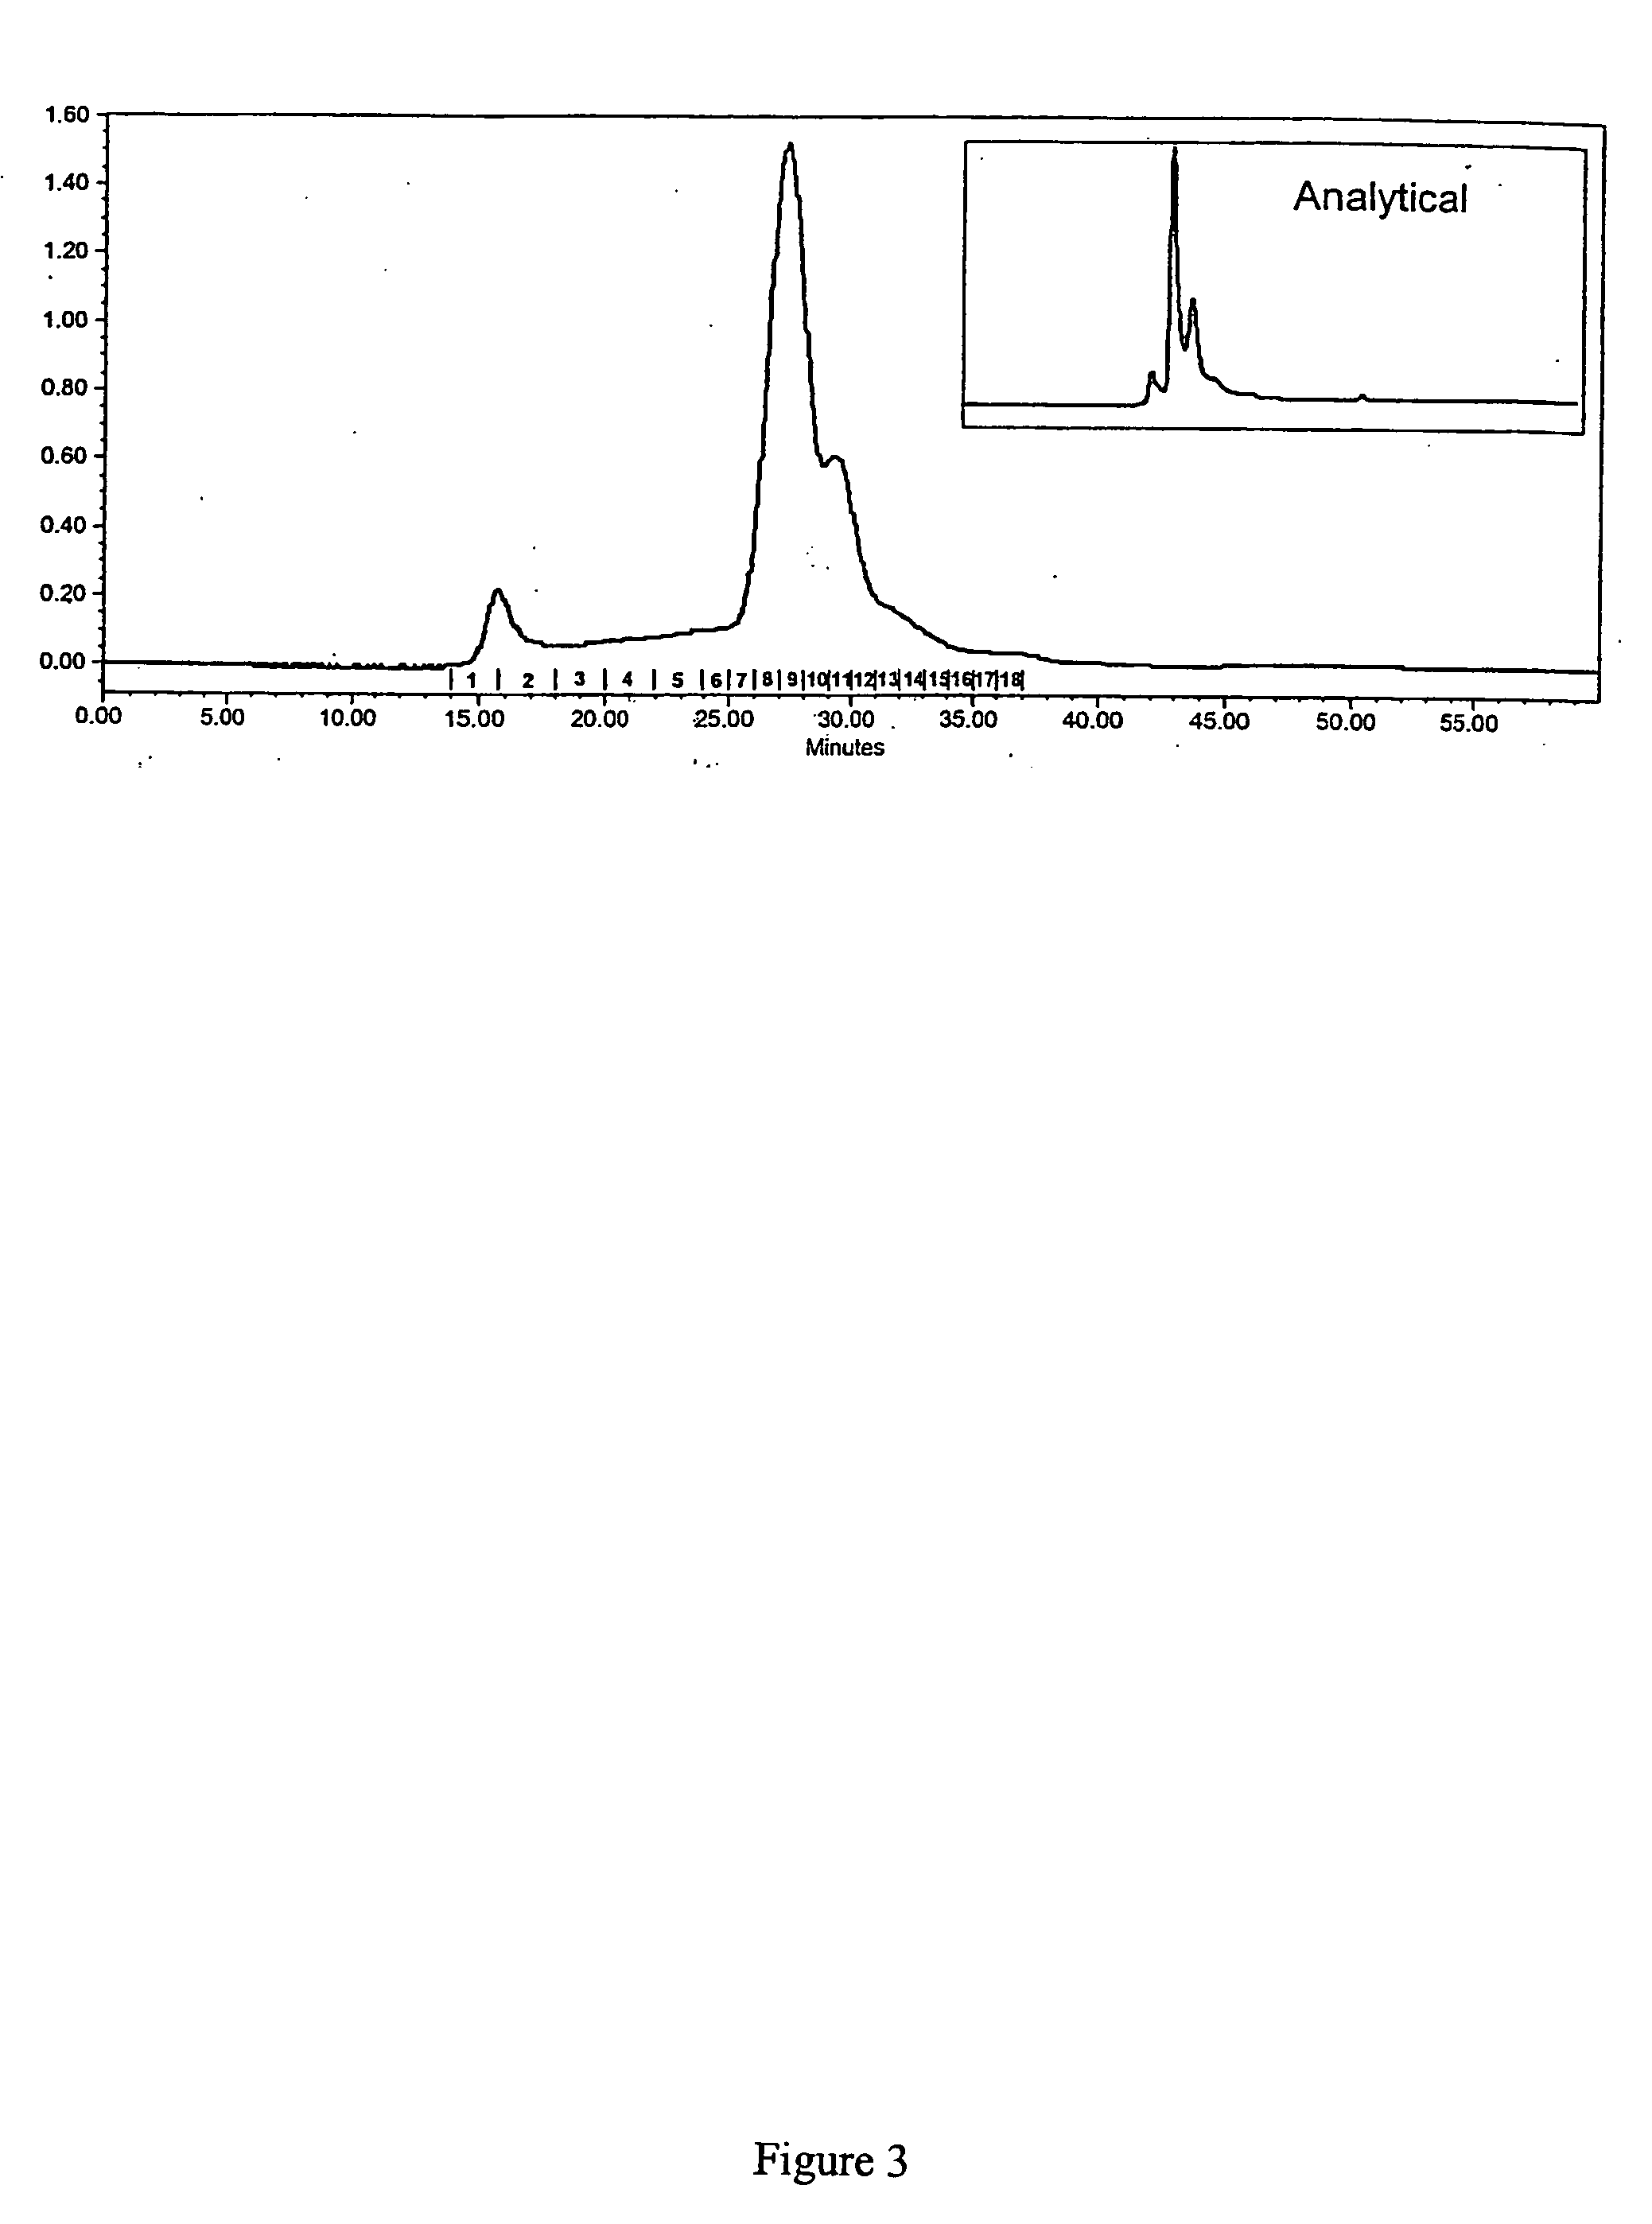 Methods and products based on oligomerization of stress proteins